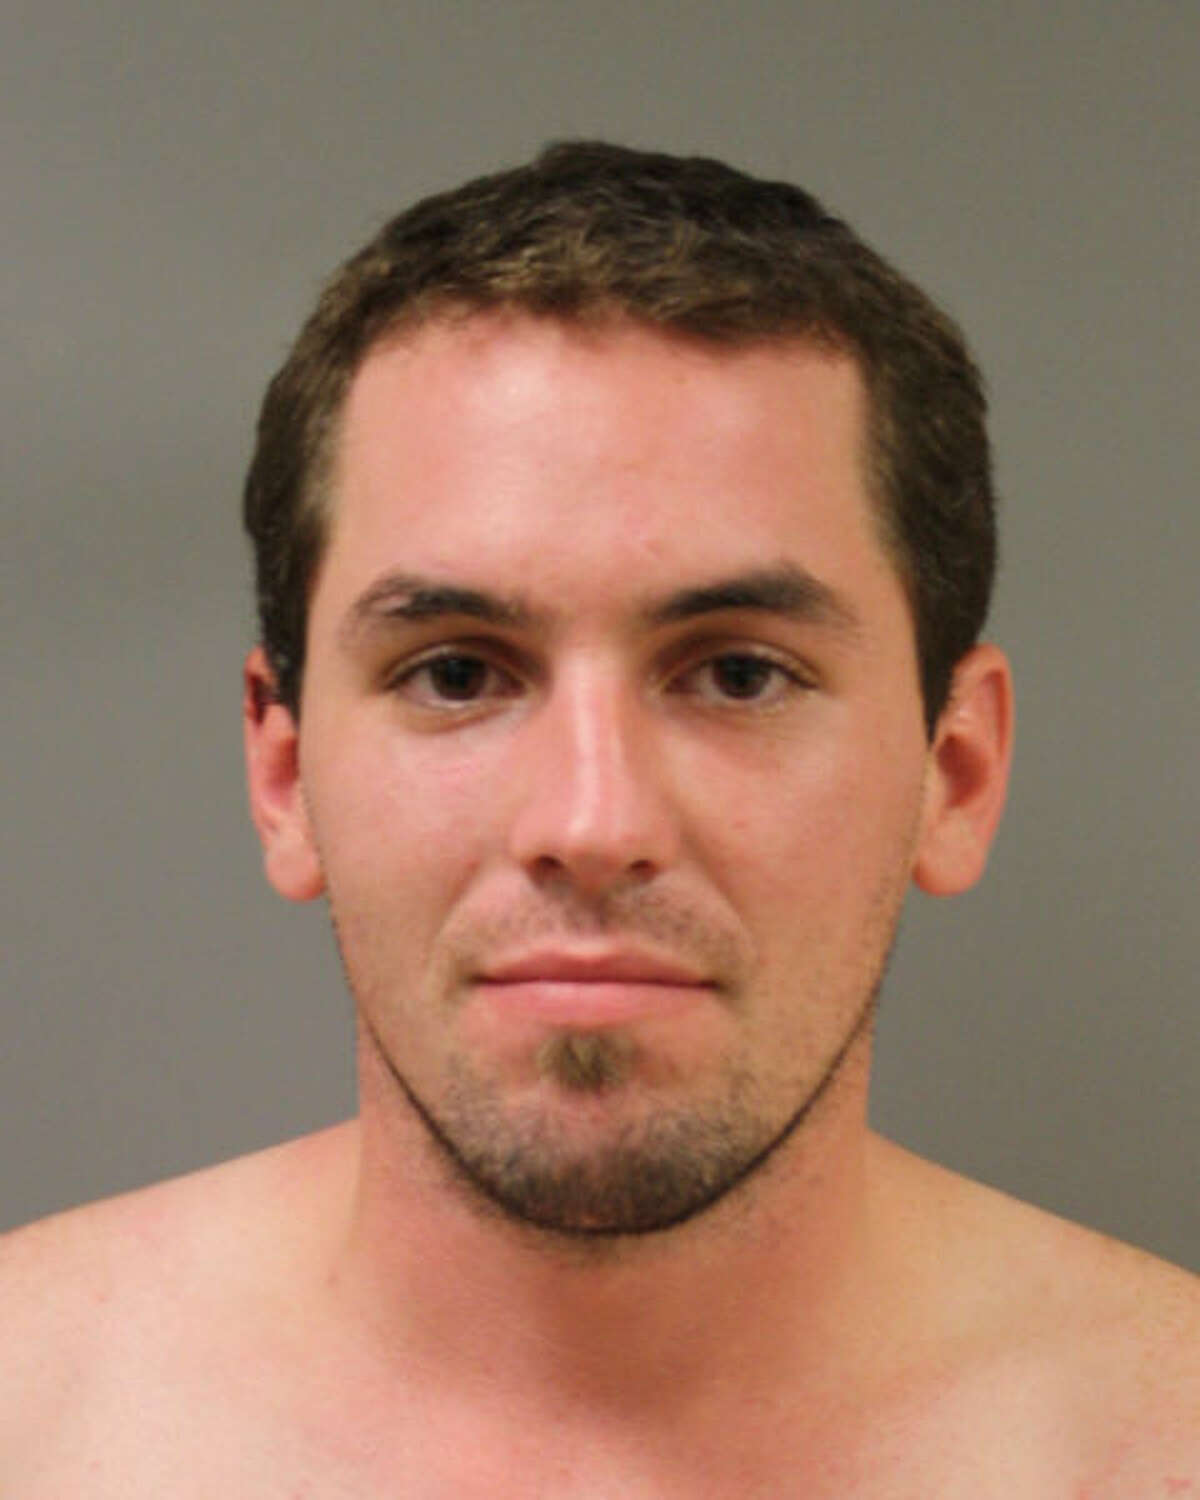 Andrew Abernathy, accused of breaking into a woman's apartment naked, was arrested and charged with criminal trespass.